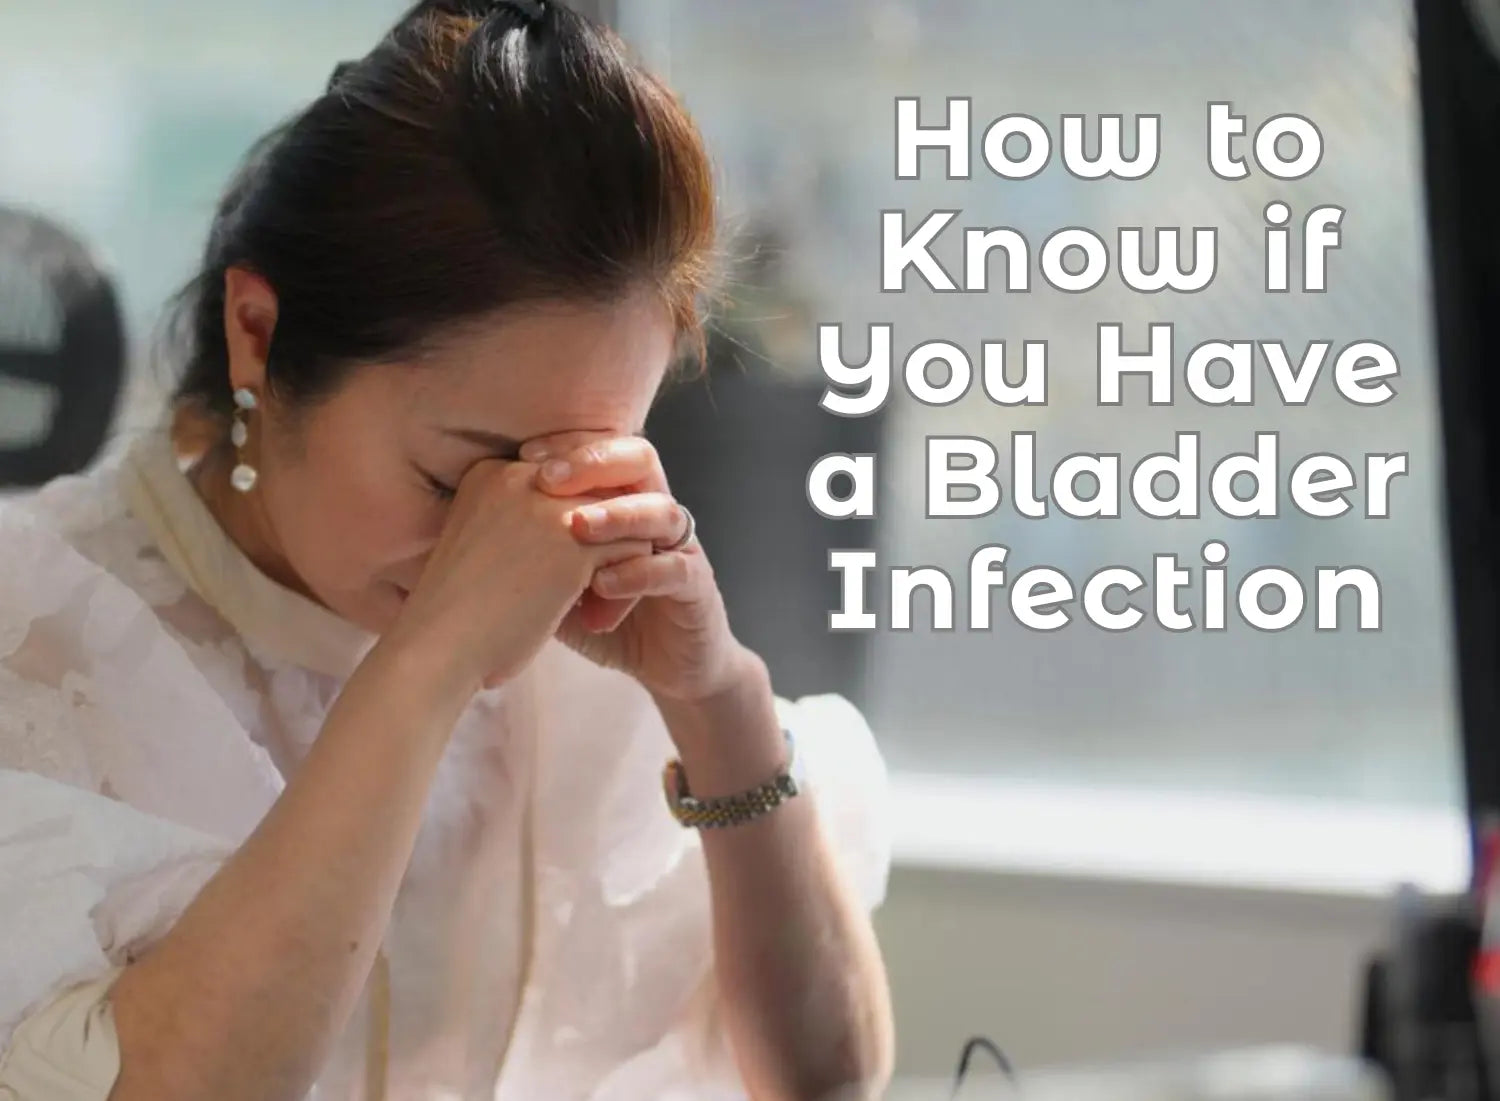 How to Know if You Have a Bladder Infection - Underleak